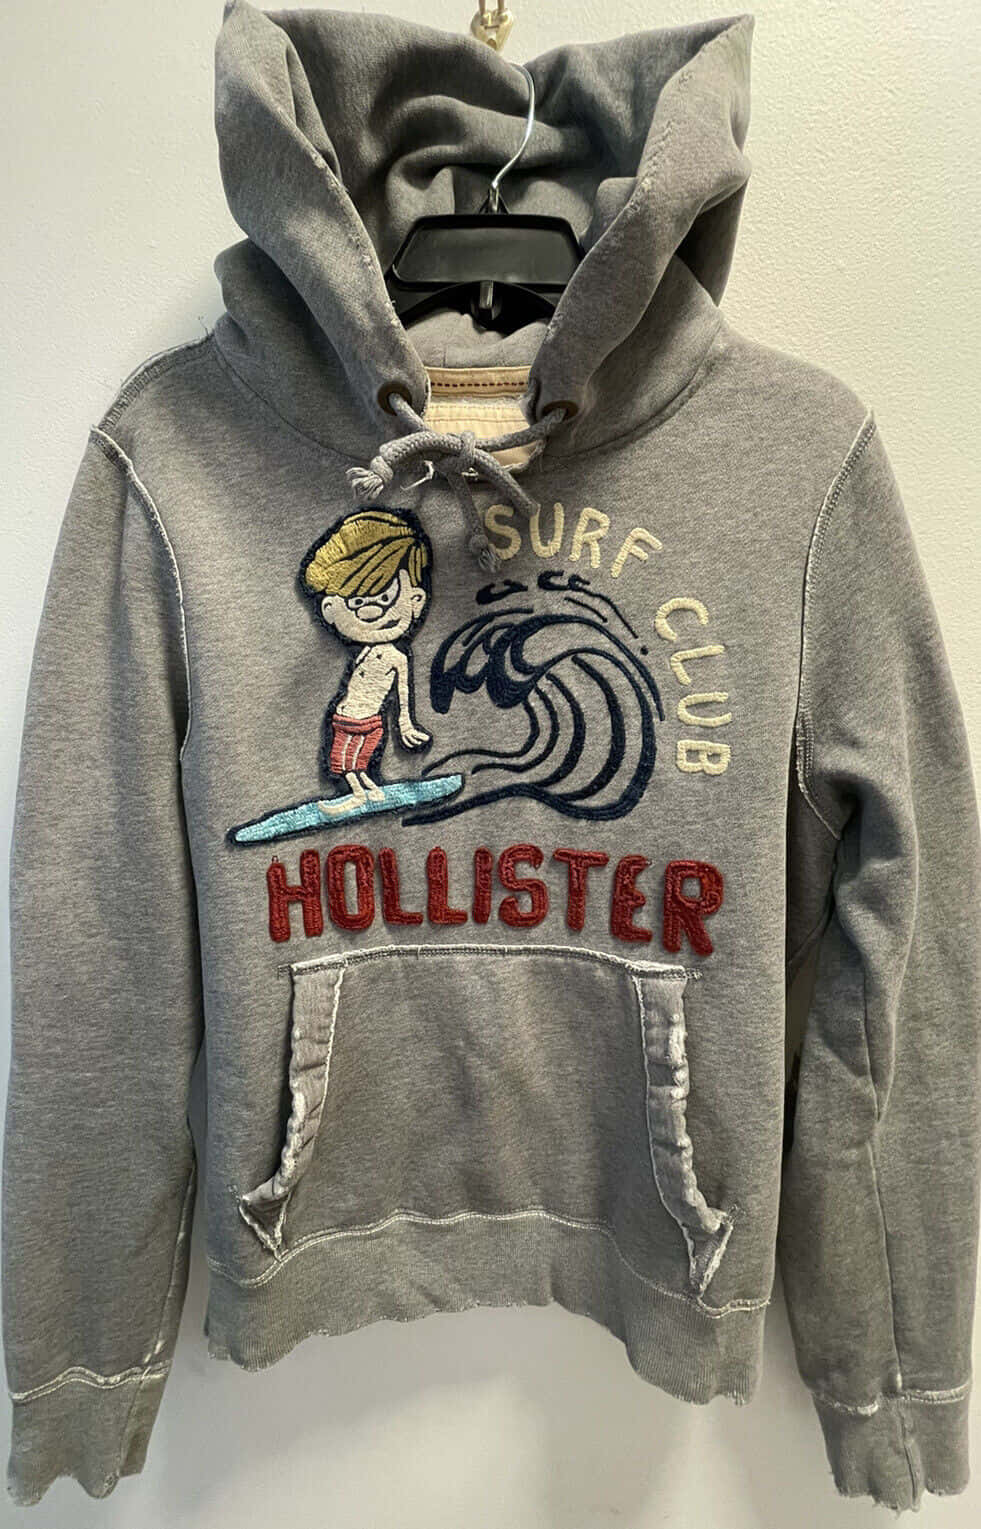 Brighten Up Your Winter Wardrobe with Statement Pieces from Hollister